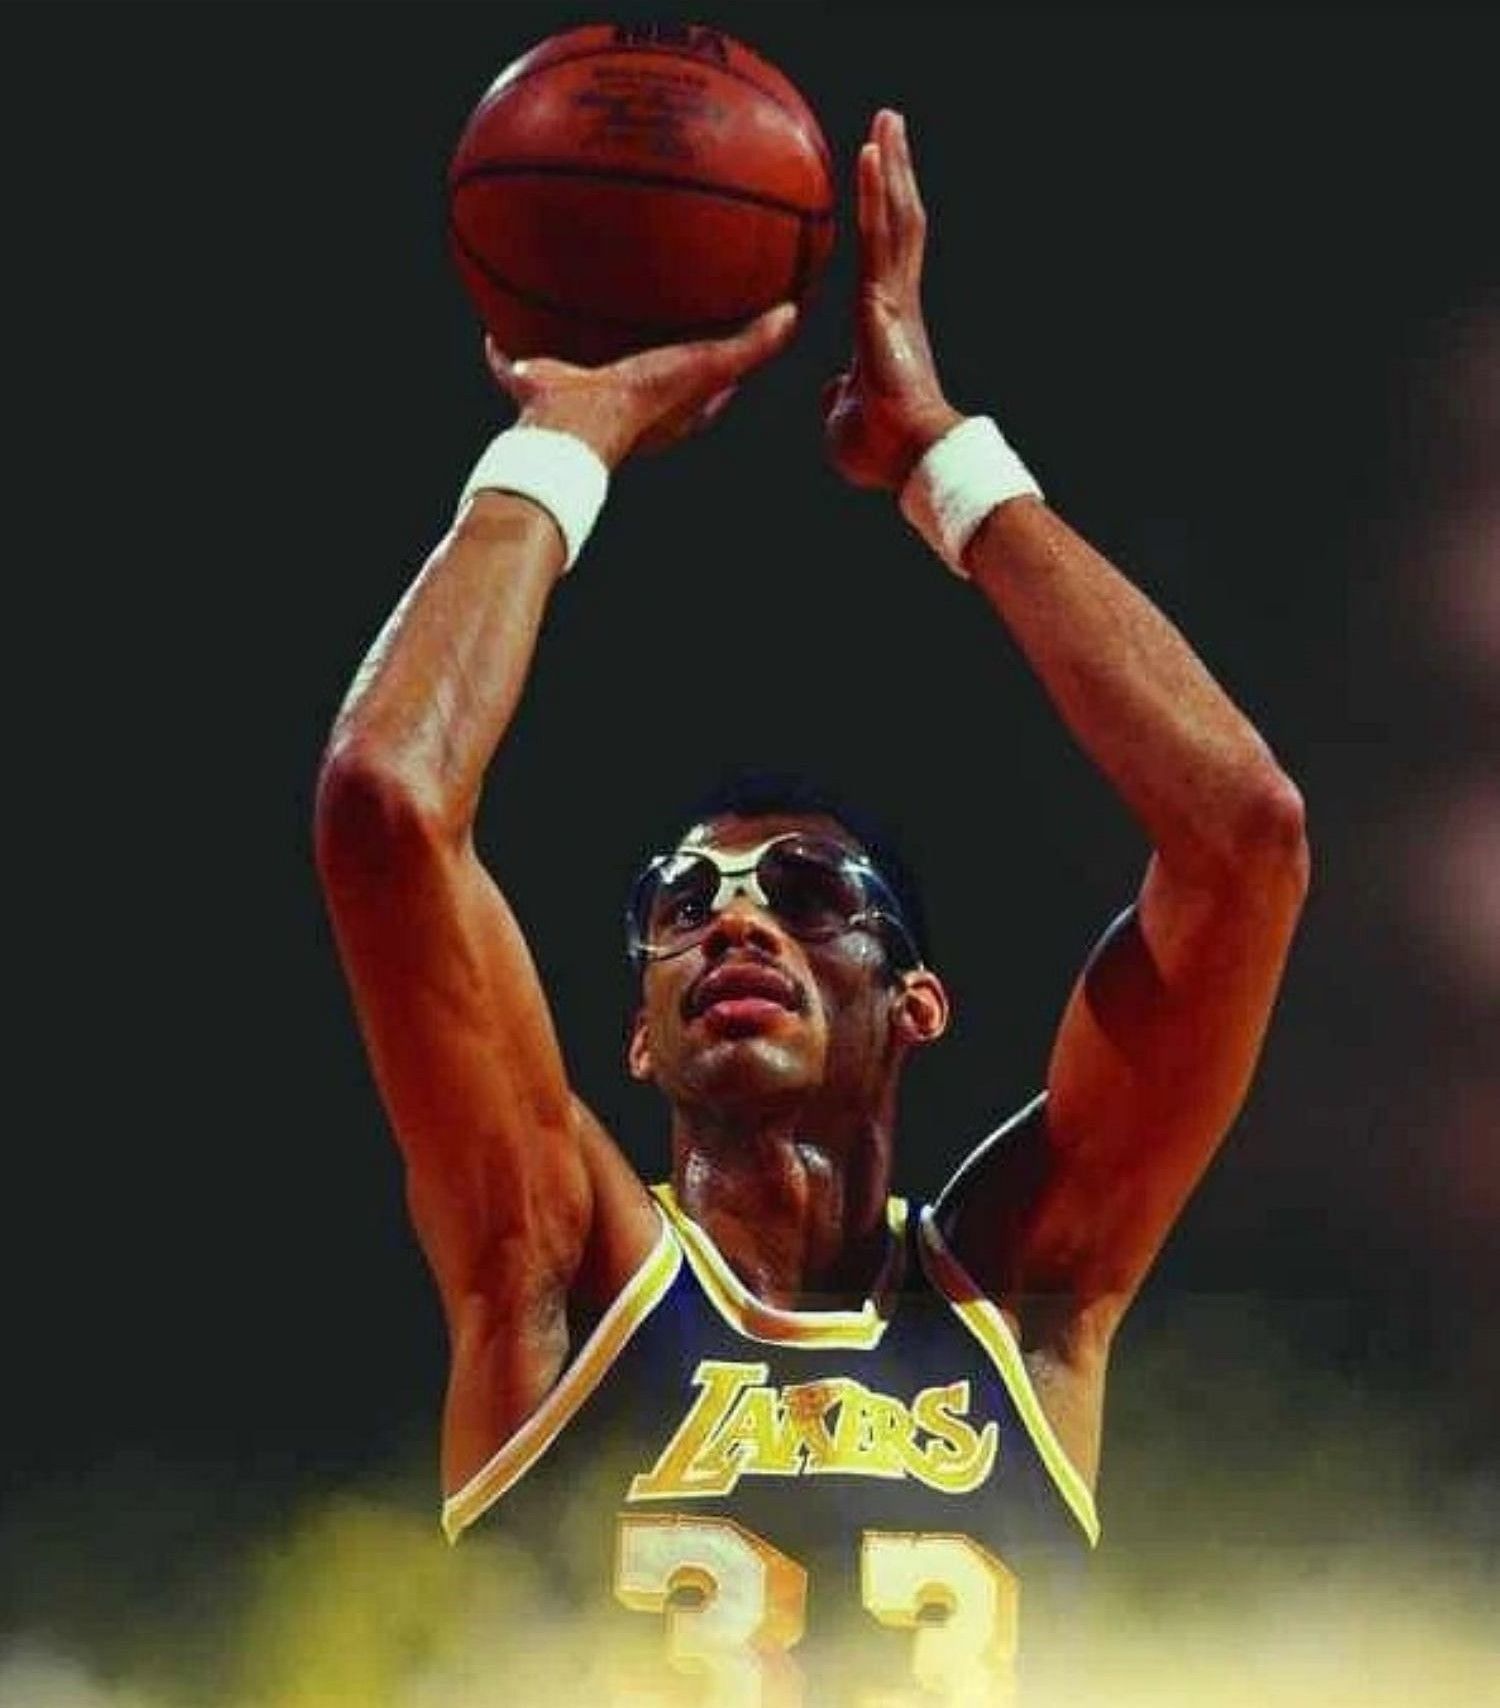 Kareem Abdul-Jabbar finished his career with 38,387 points.